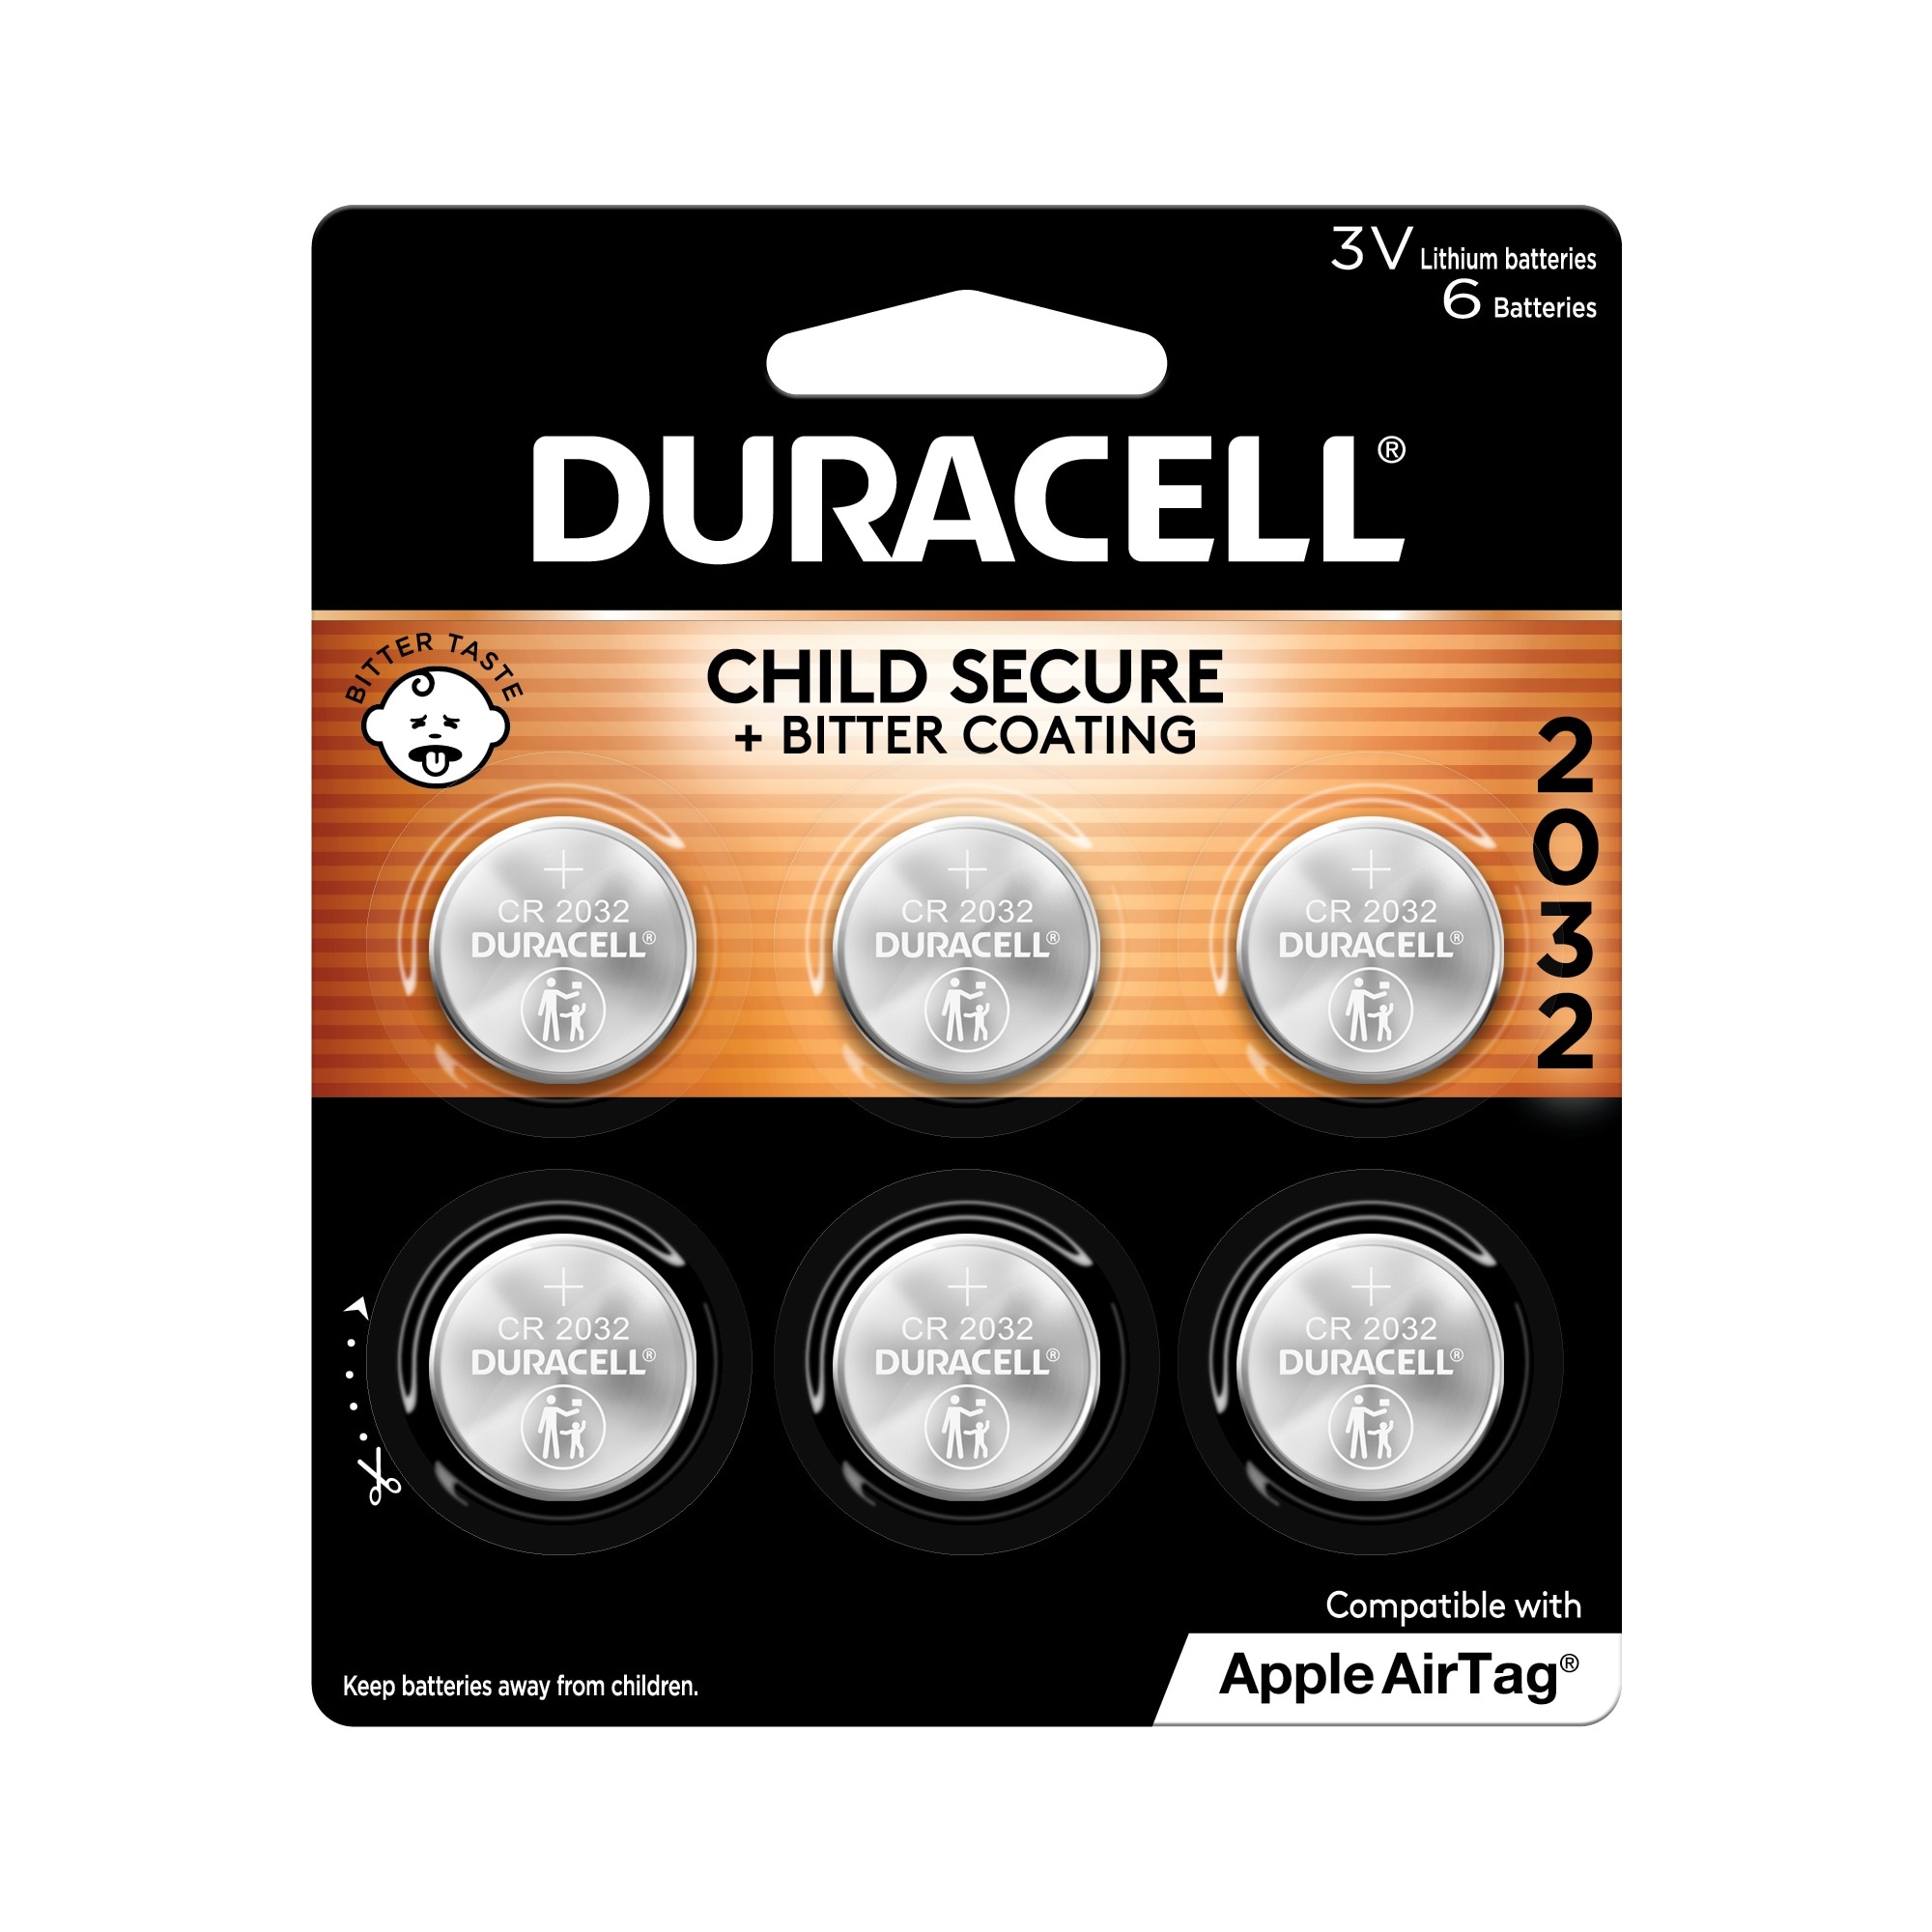 DURACELL Specialty CR2032 Lithium Coin 3V Battery - DURACELL 